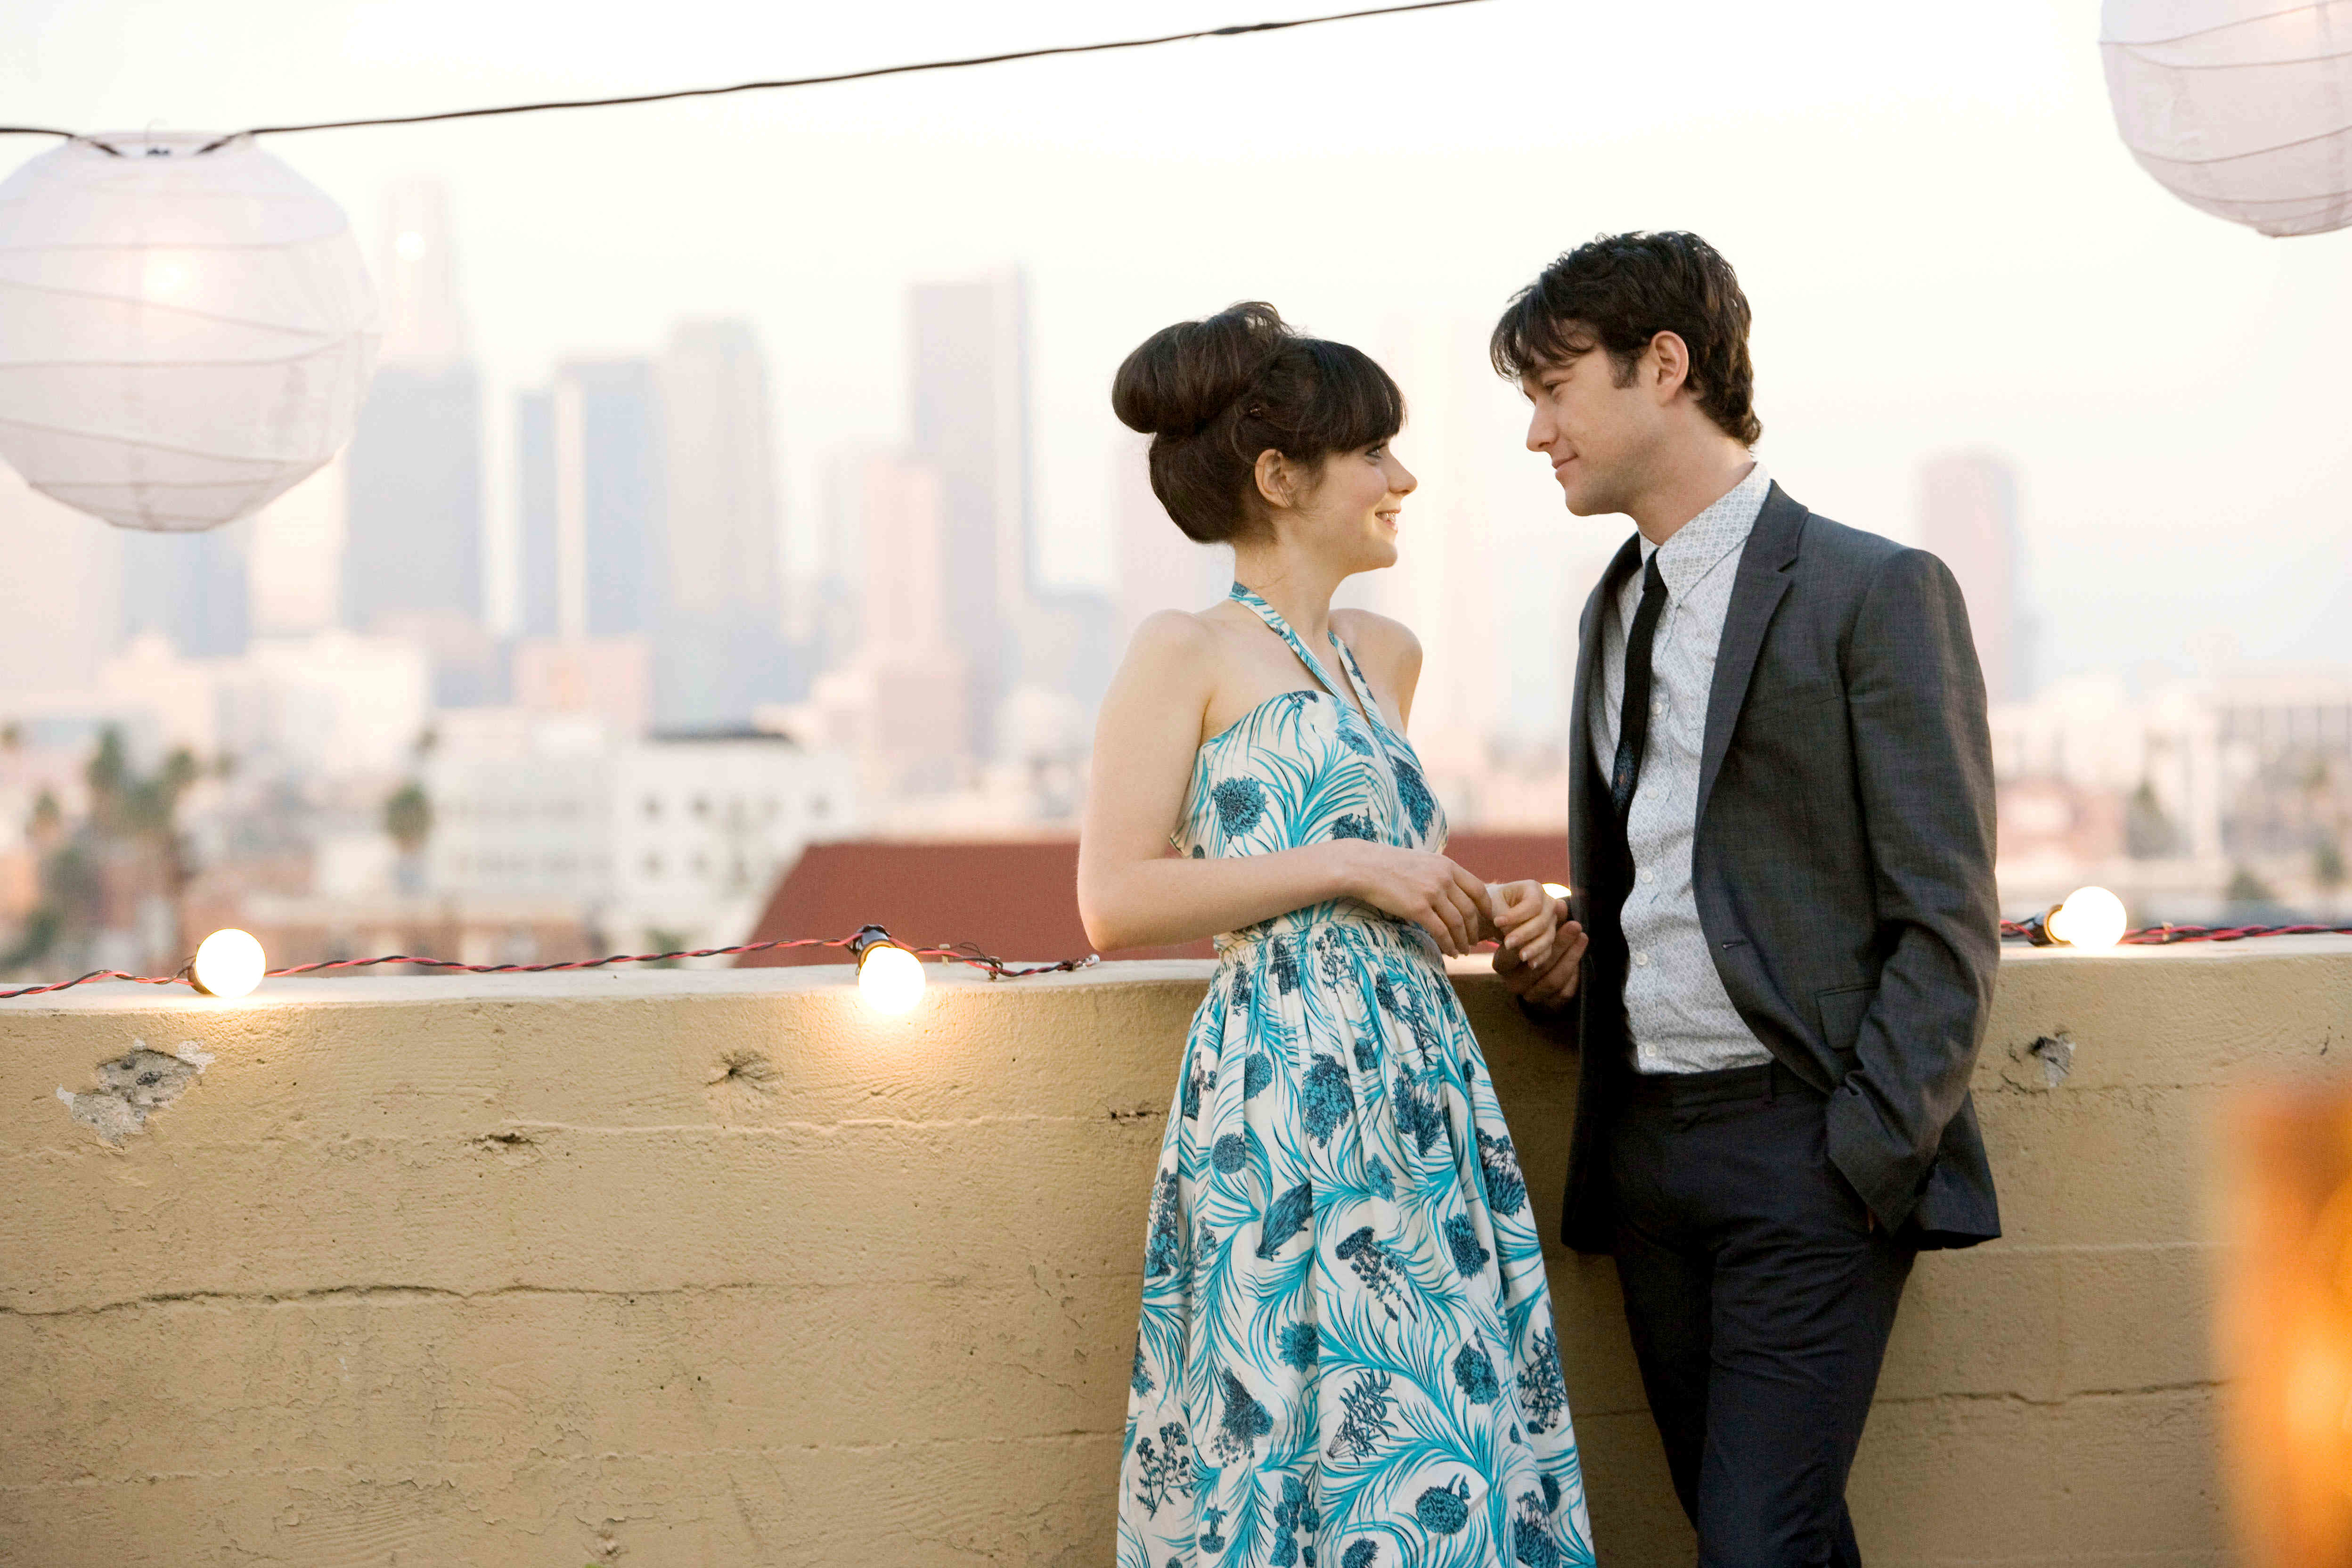 Two characters from the movie &quot;500 Days of Summer&quot; sharing a moment on a rooftop with city skyline in the background